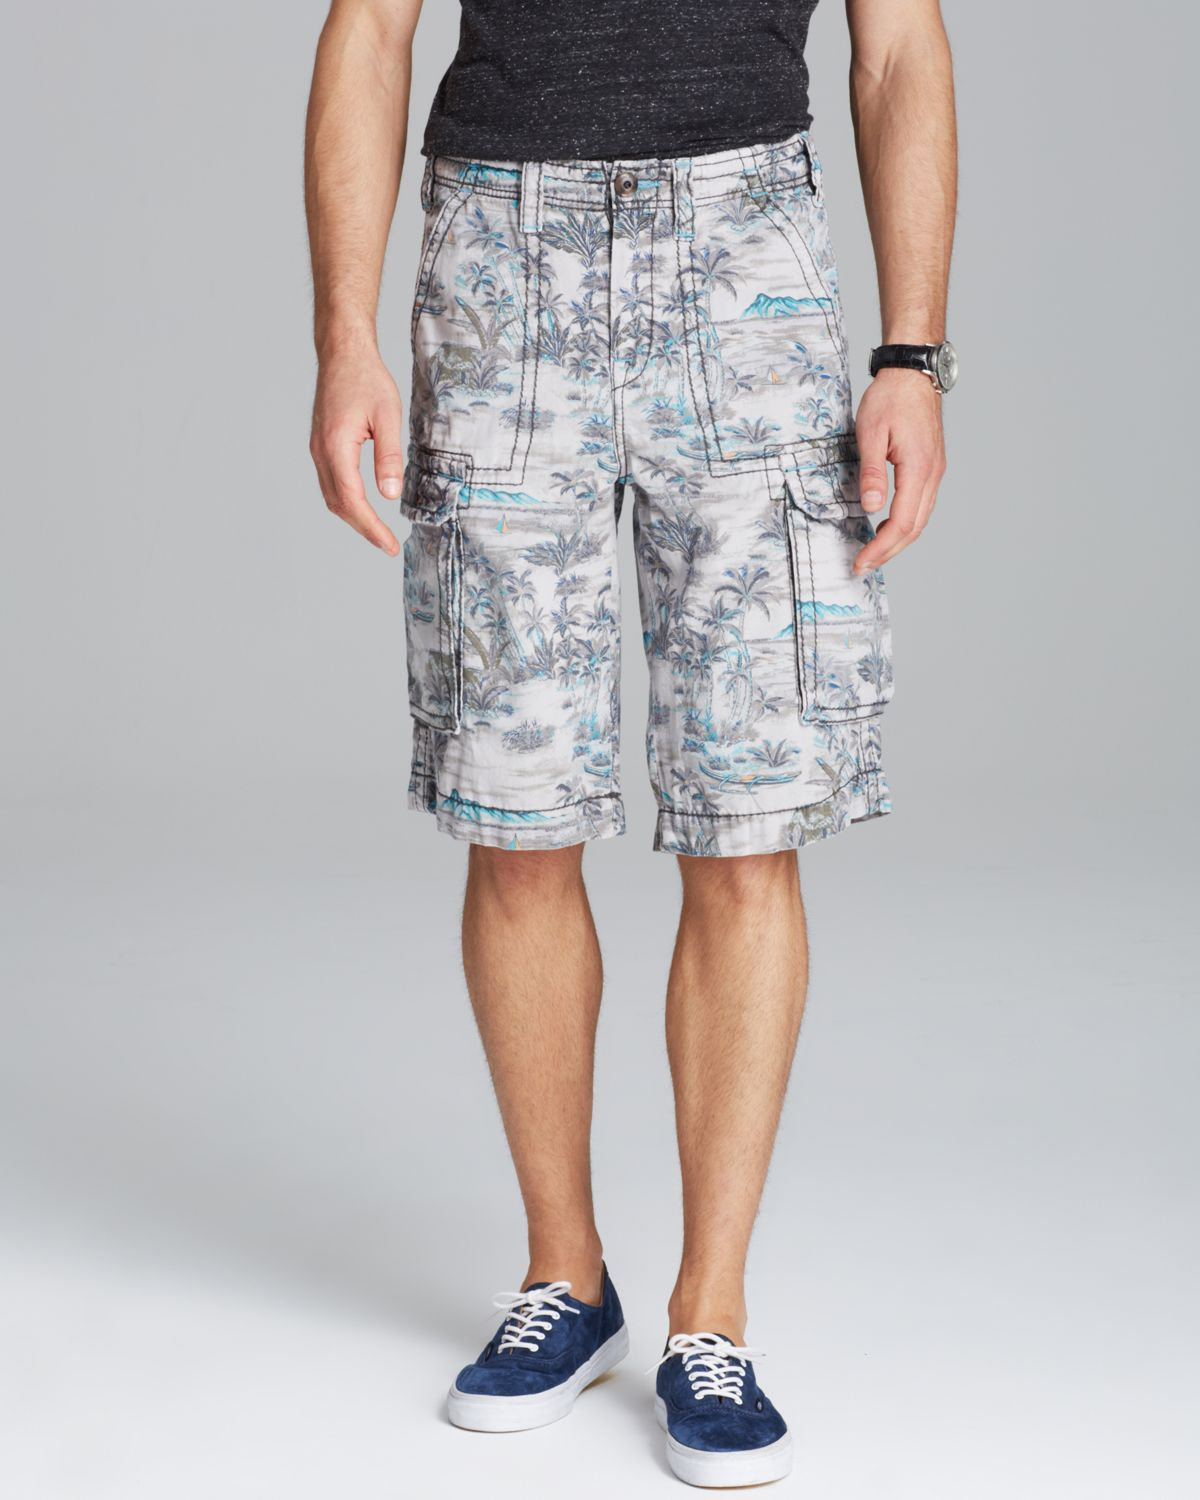 Lyst - True Religion Pacific Island Cargo Shorts in Blue for Men